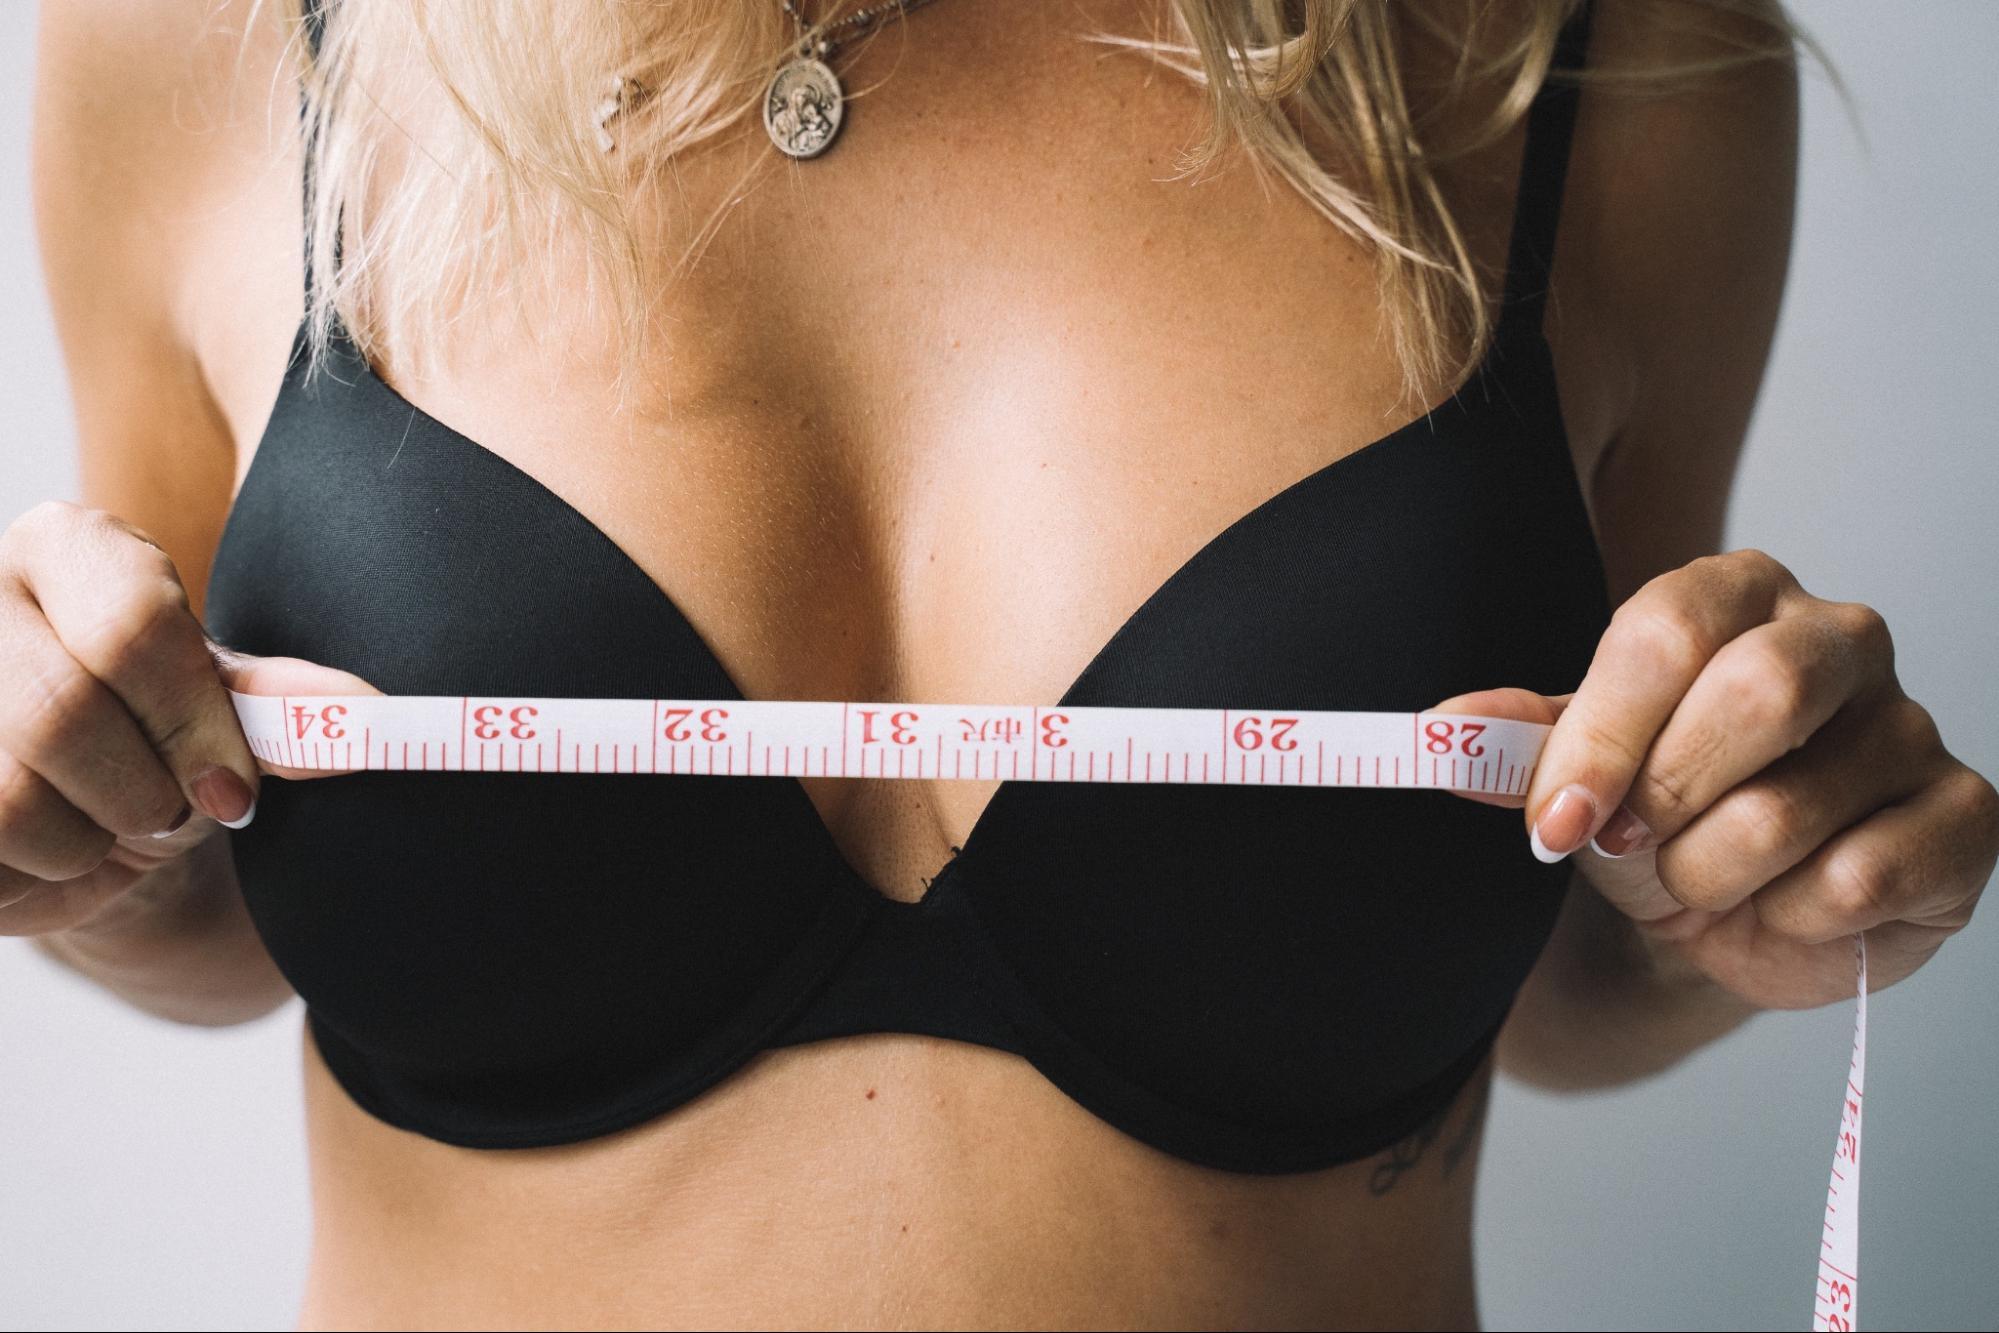 What is the smallest cup size in bras? - Quora